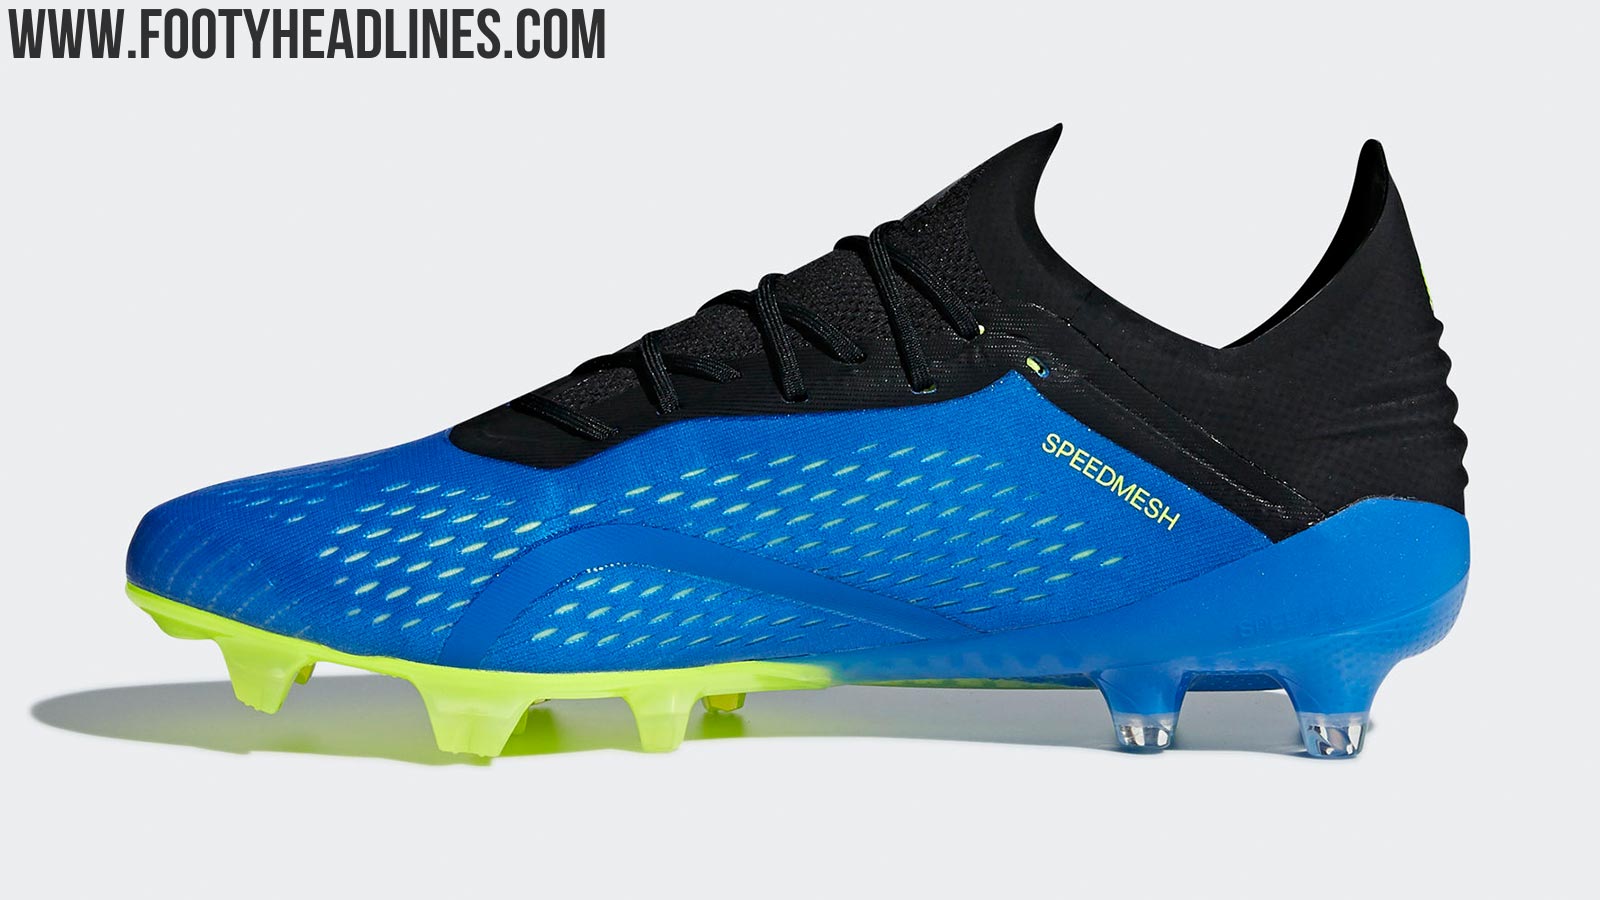 All-New Next-Gen Adidas X 18.1 'Energy Mode' 2018 World Boots Released - Footy Headlines